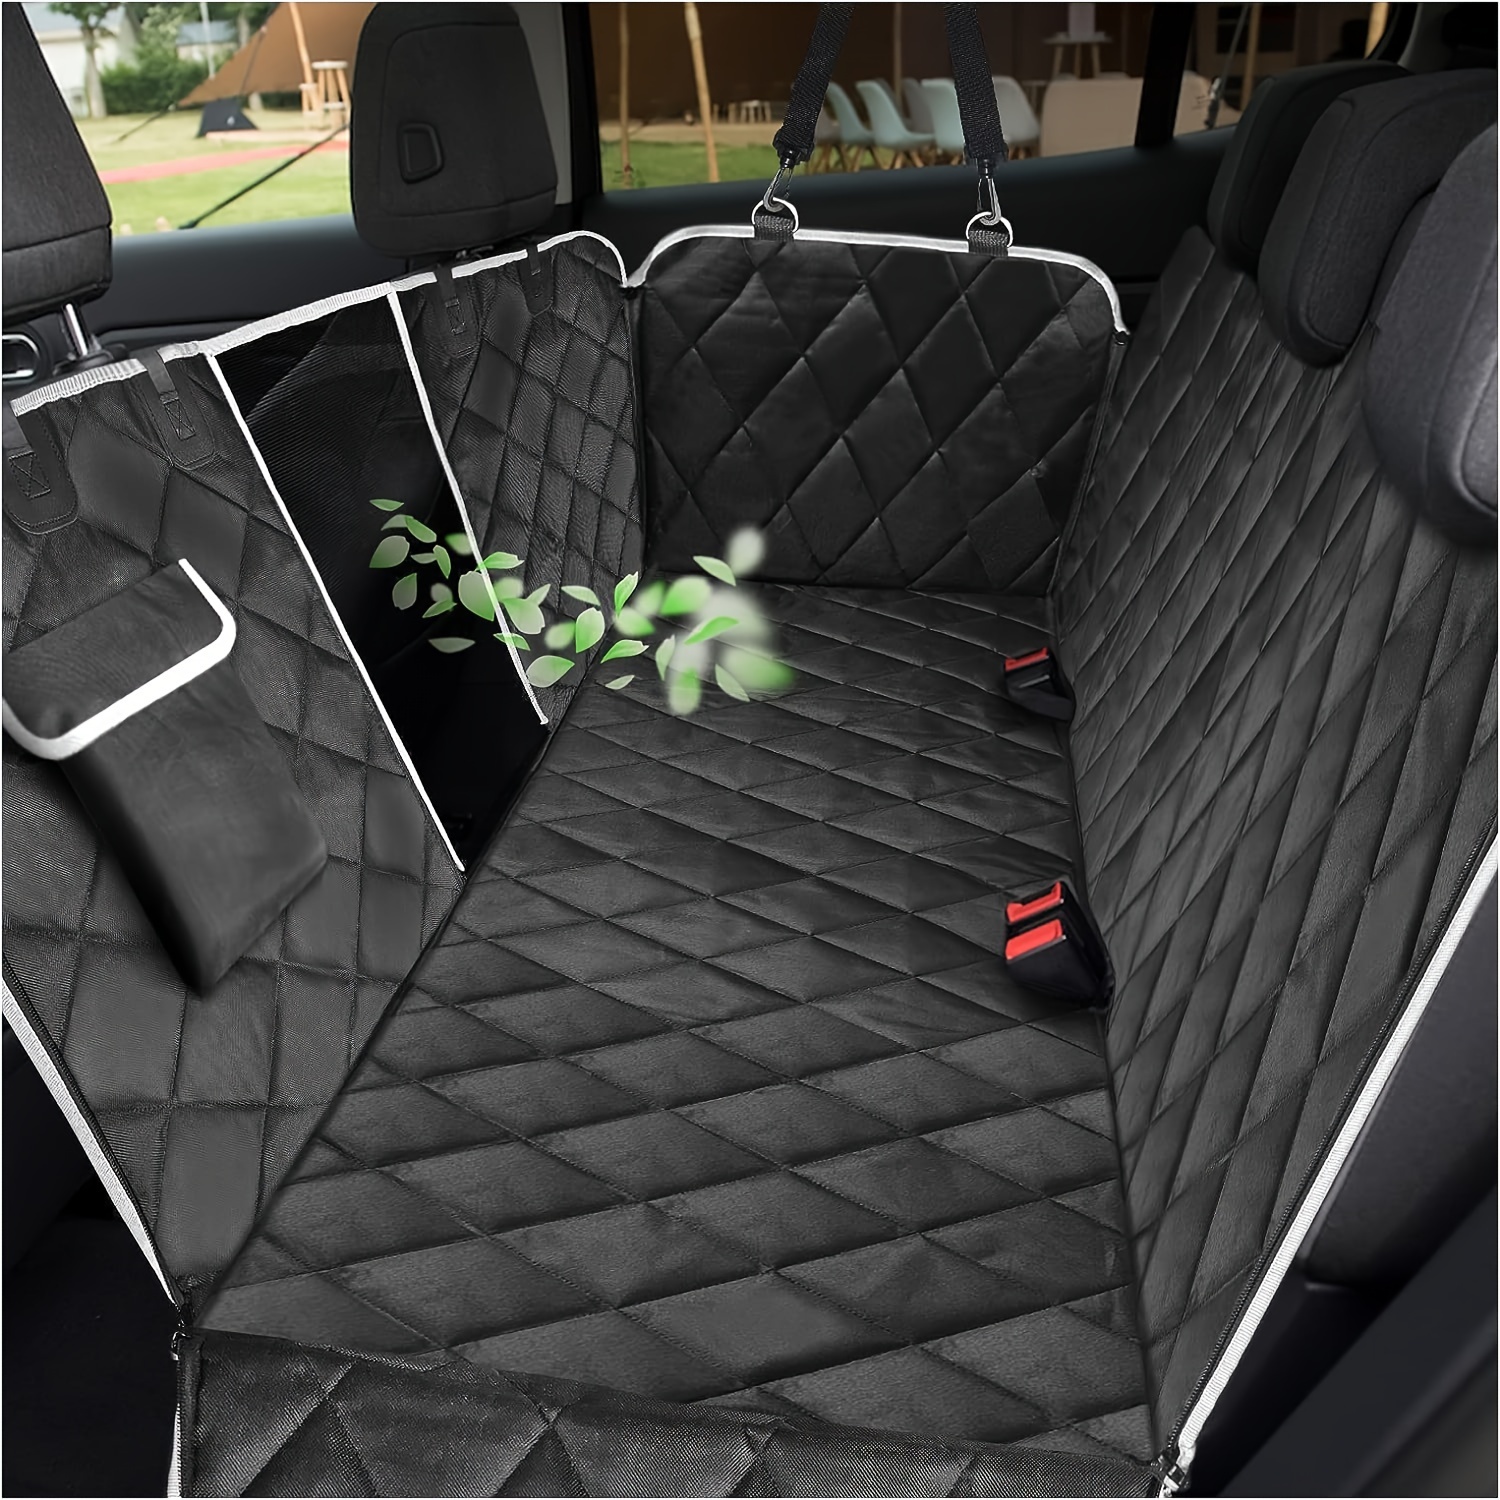 

Waterproof Dog Car Seat Cover With Mesh Visual Window And Storage Pockets, Durable Scratch-resistant Non-slip Pet Hammock, Universal Fit For Cars, Trucks, And Suvs